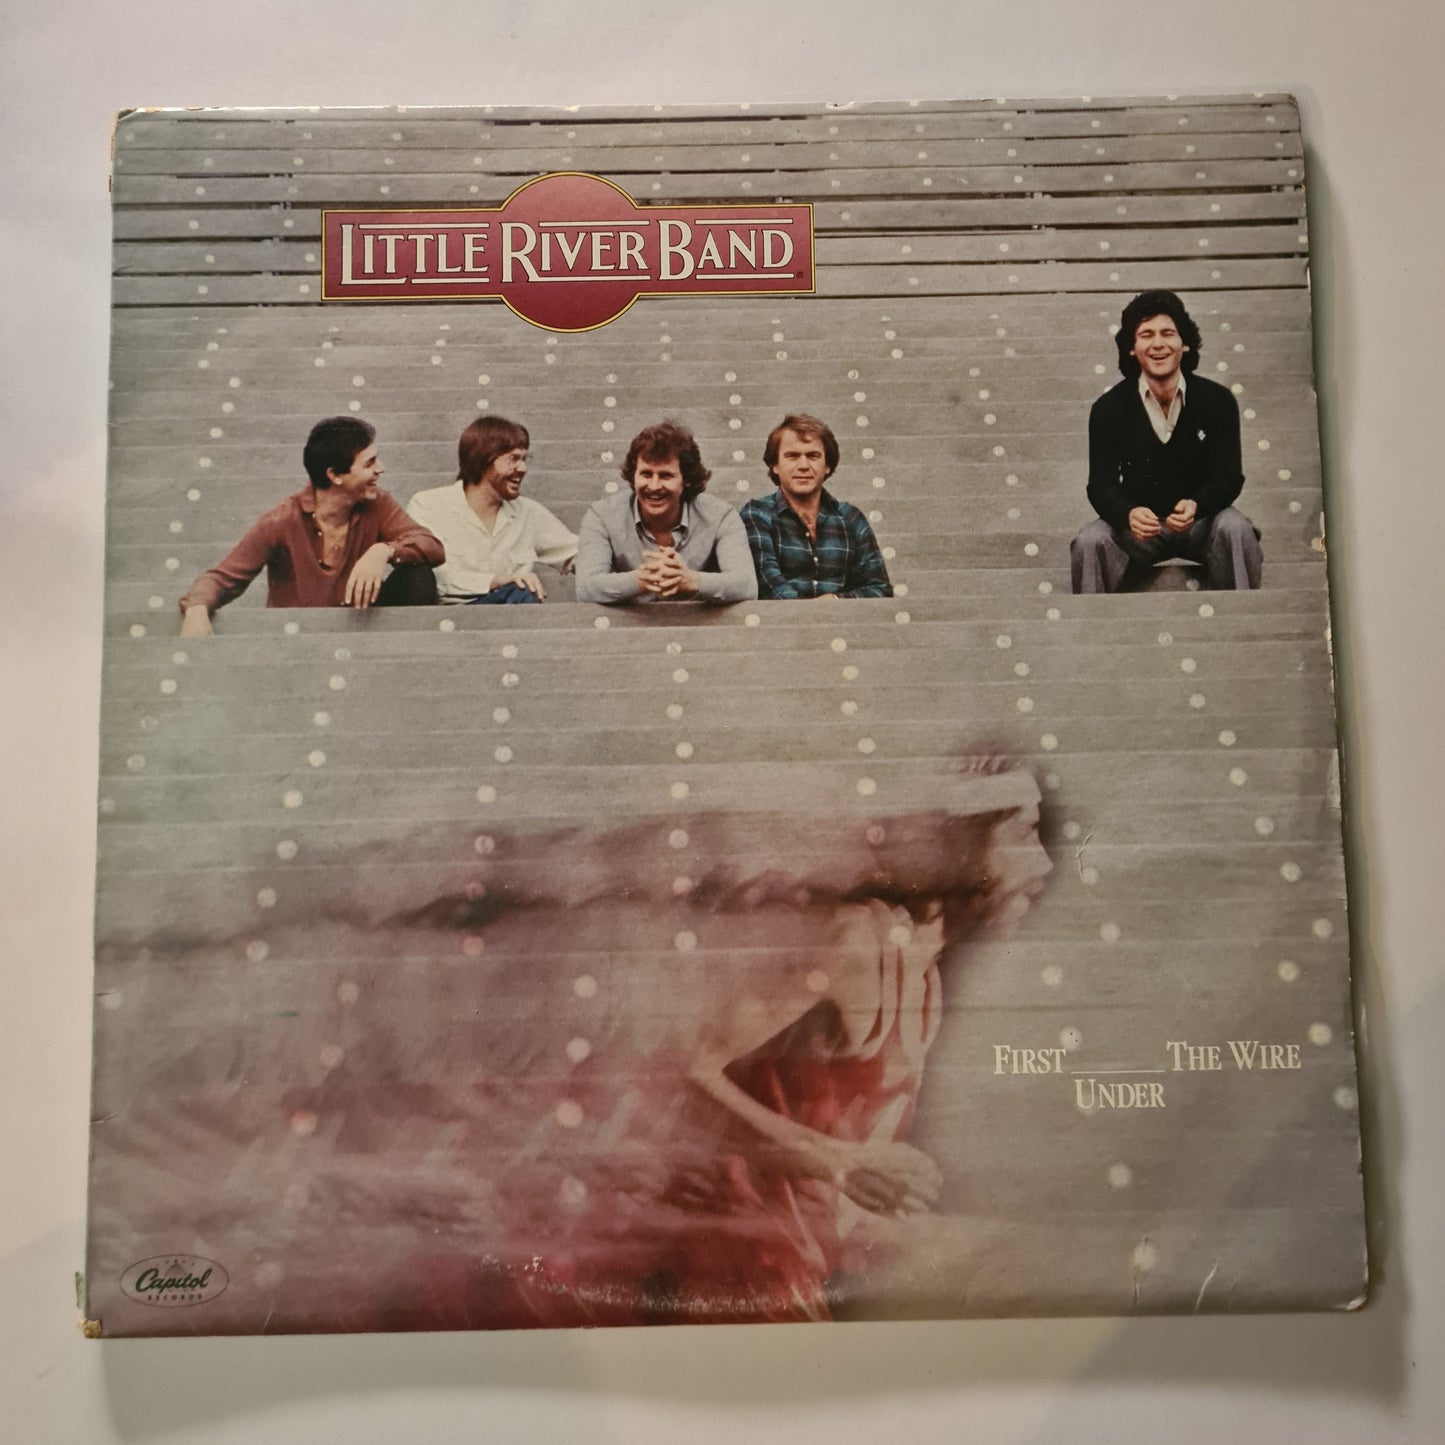 Little River Band - First Under The Wire - 1979 - Vinyl Record